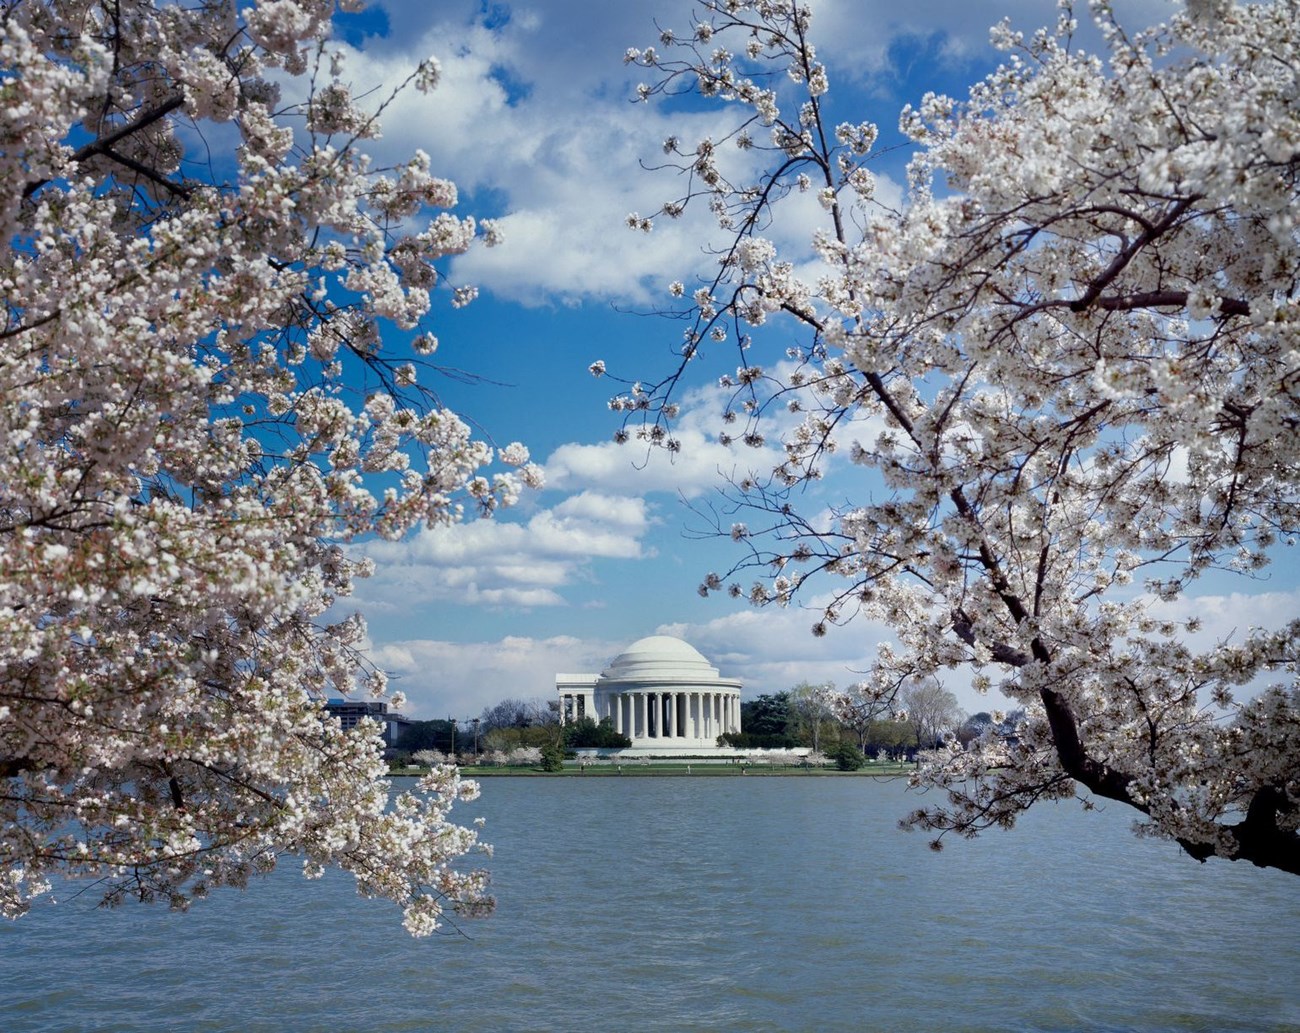 Best Cherry Blossom Cities In The World—Where to See Cherry Blossoms